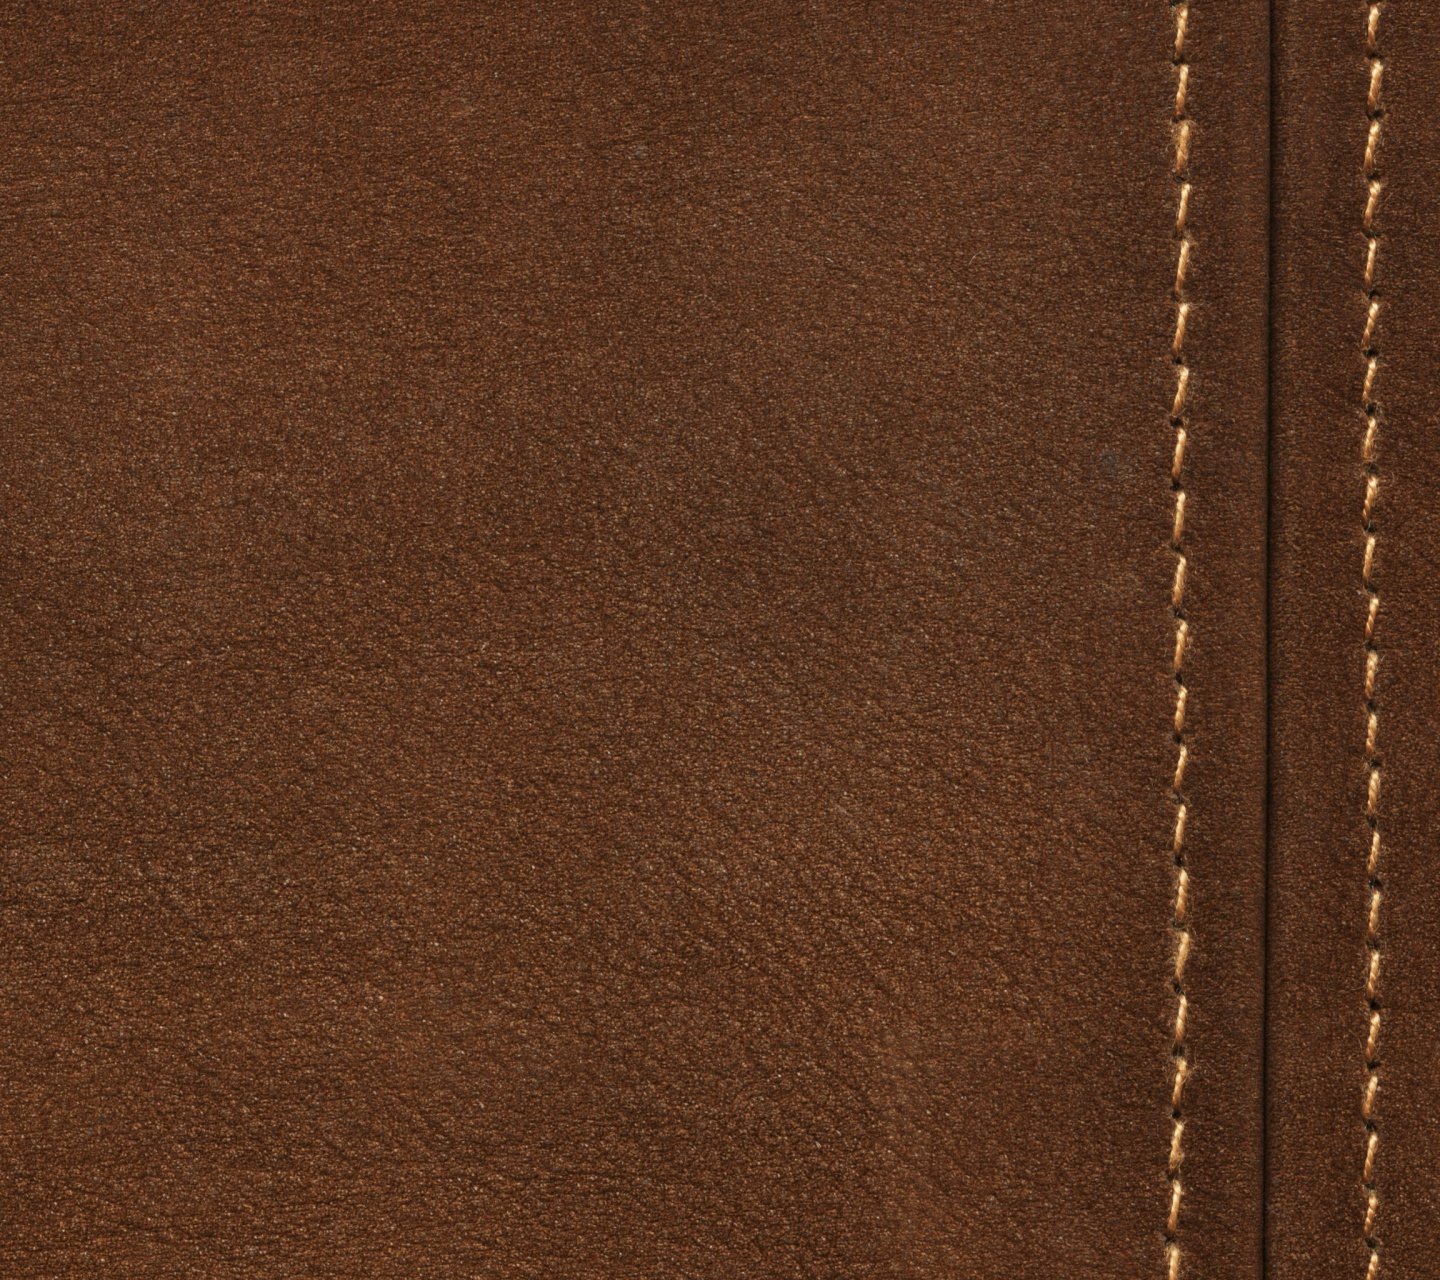 Brown Leather with Seam screenshot #1 1440x1280